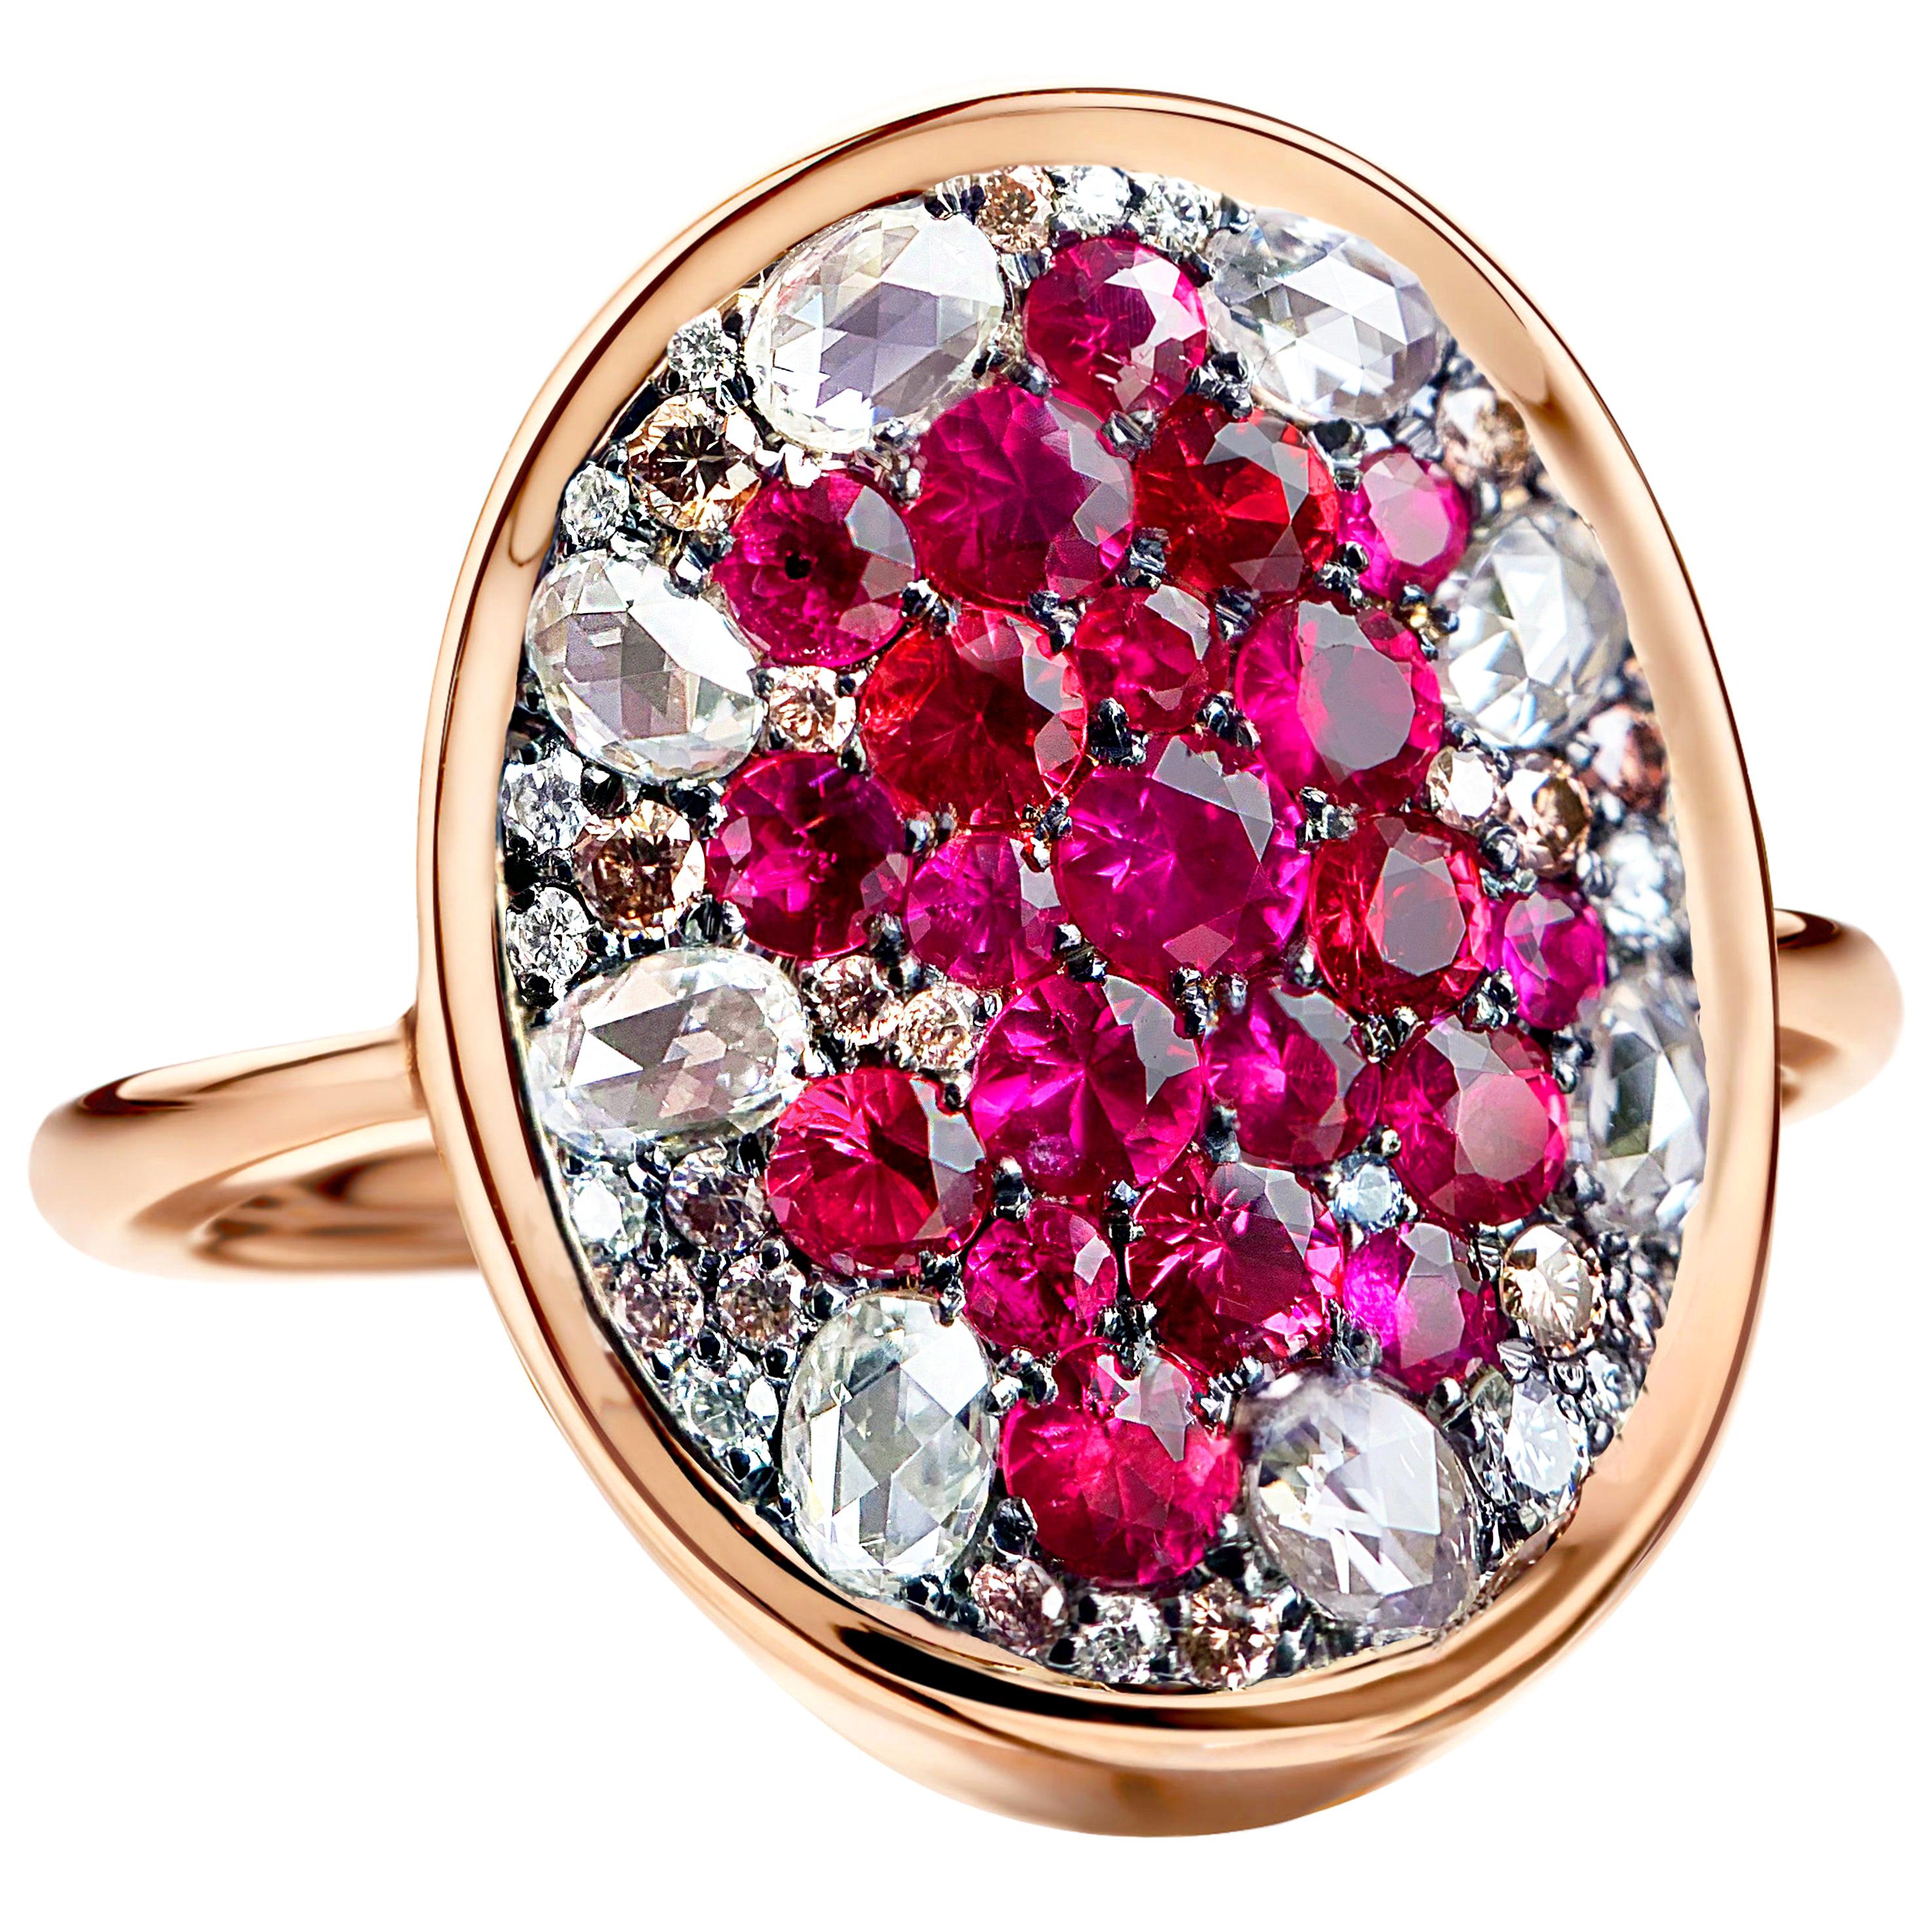 Pigeon's Blood Red Ruby Red Spinel, Pink Diamond and White Rose-Cut Diamond Ring